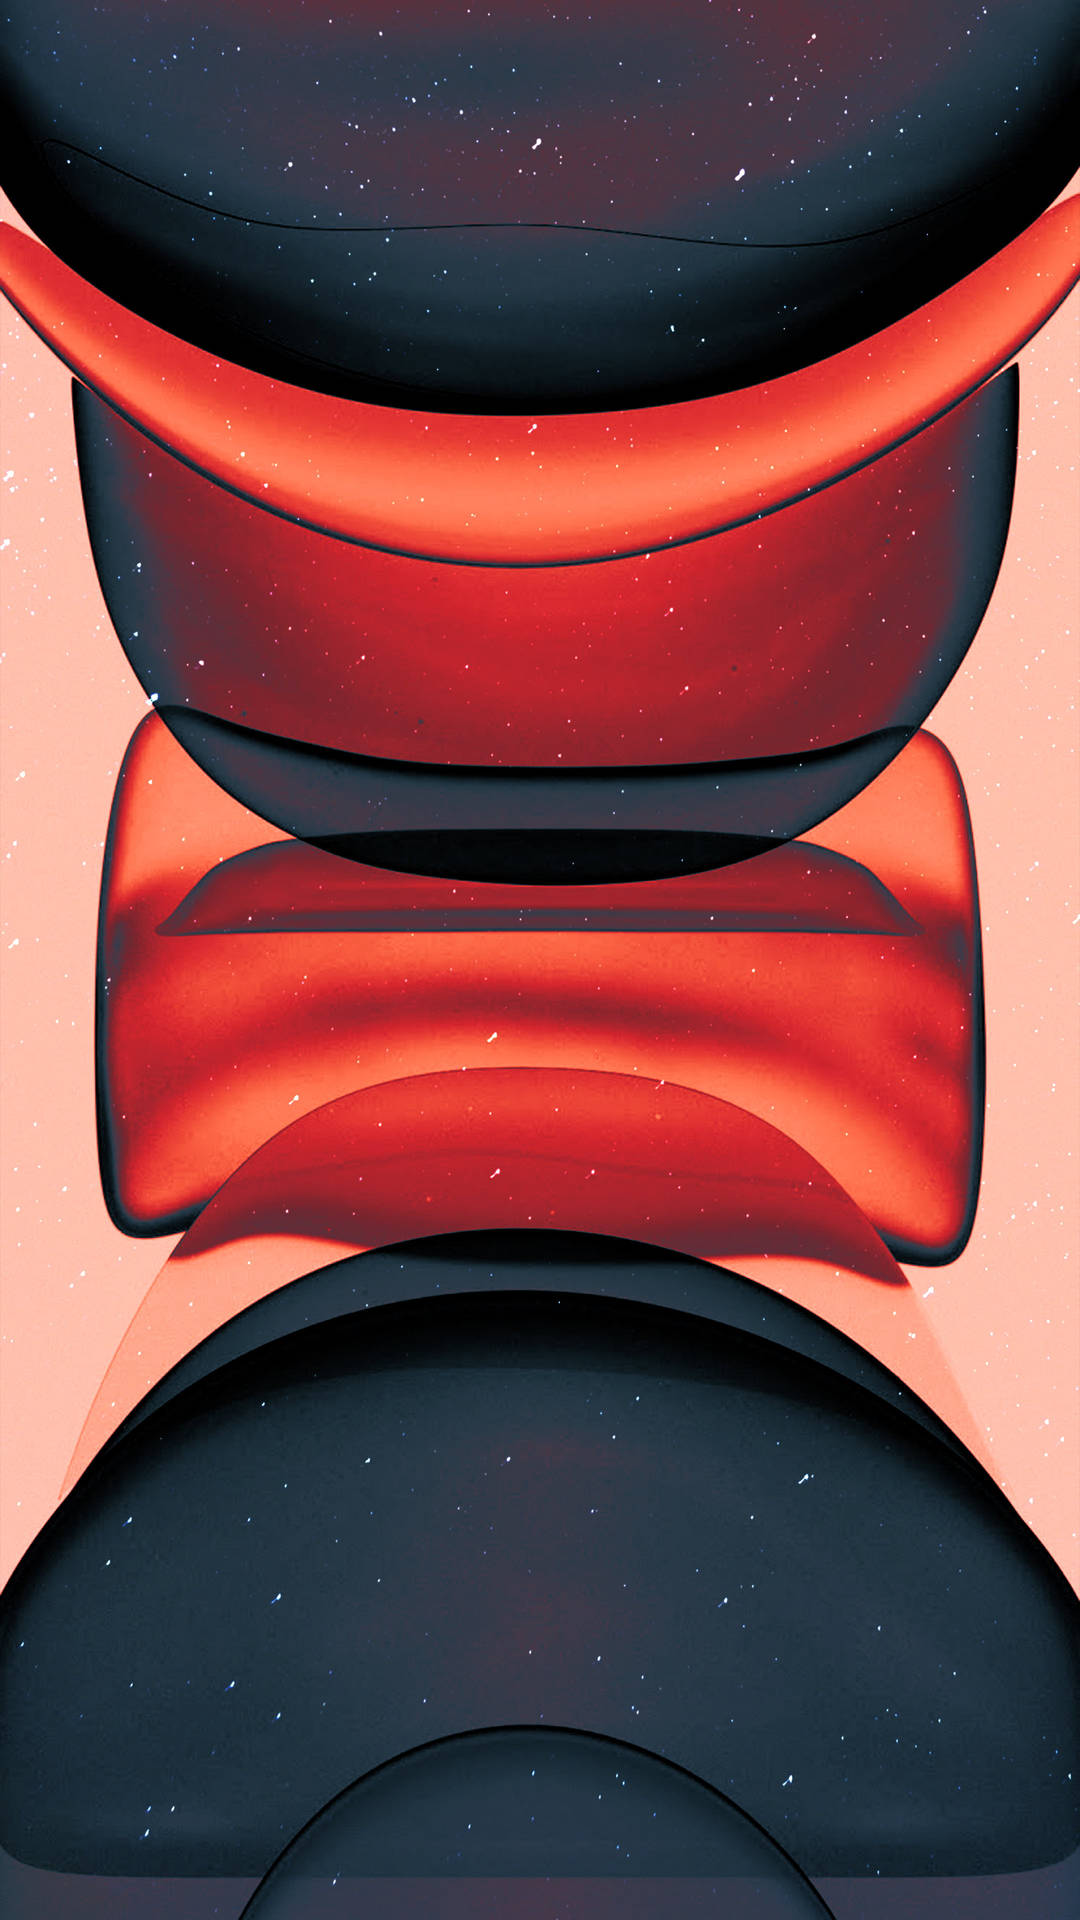 Iphone Xr Red Jelly Bean Wallpaper